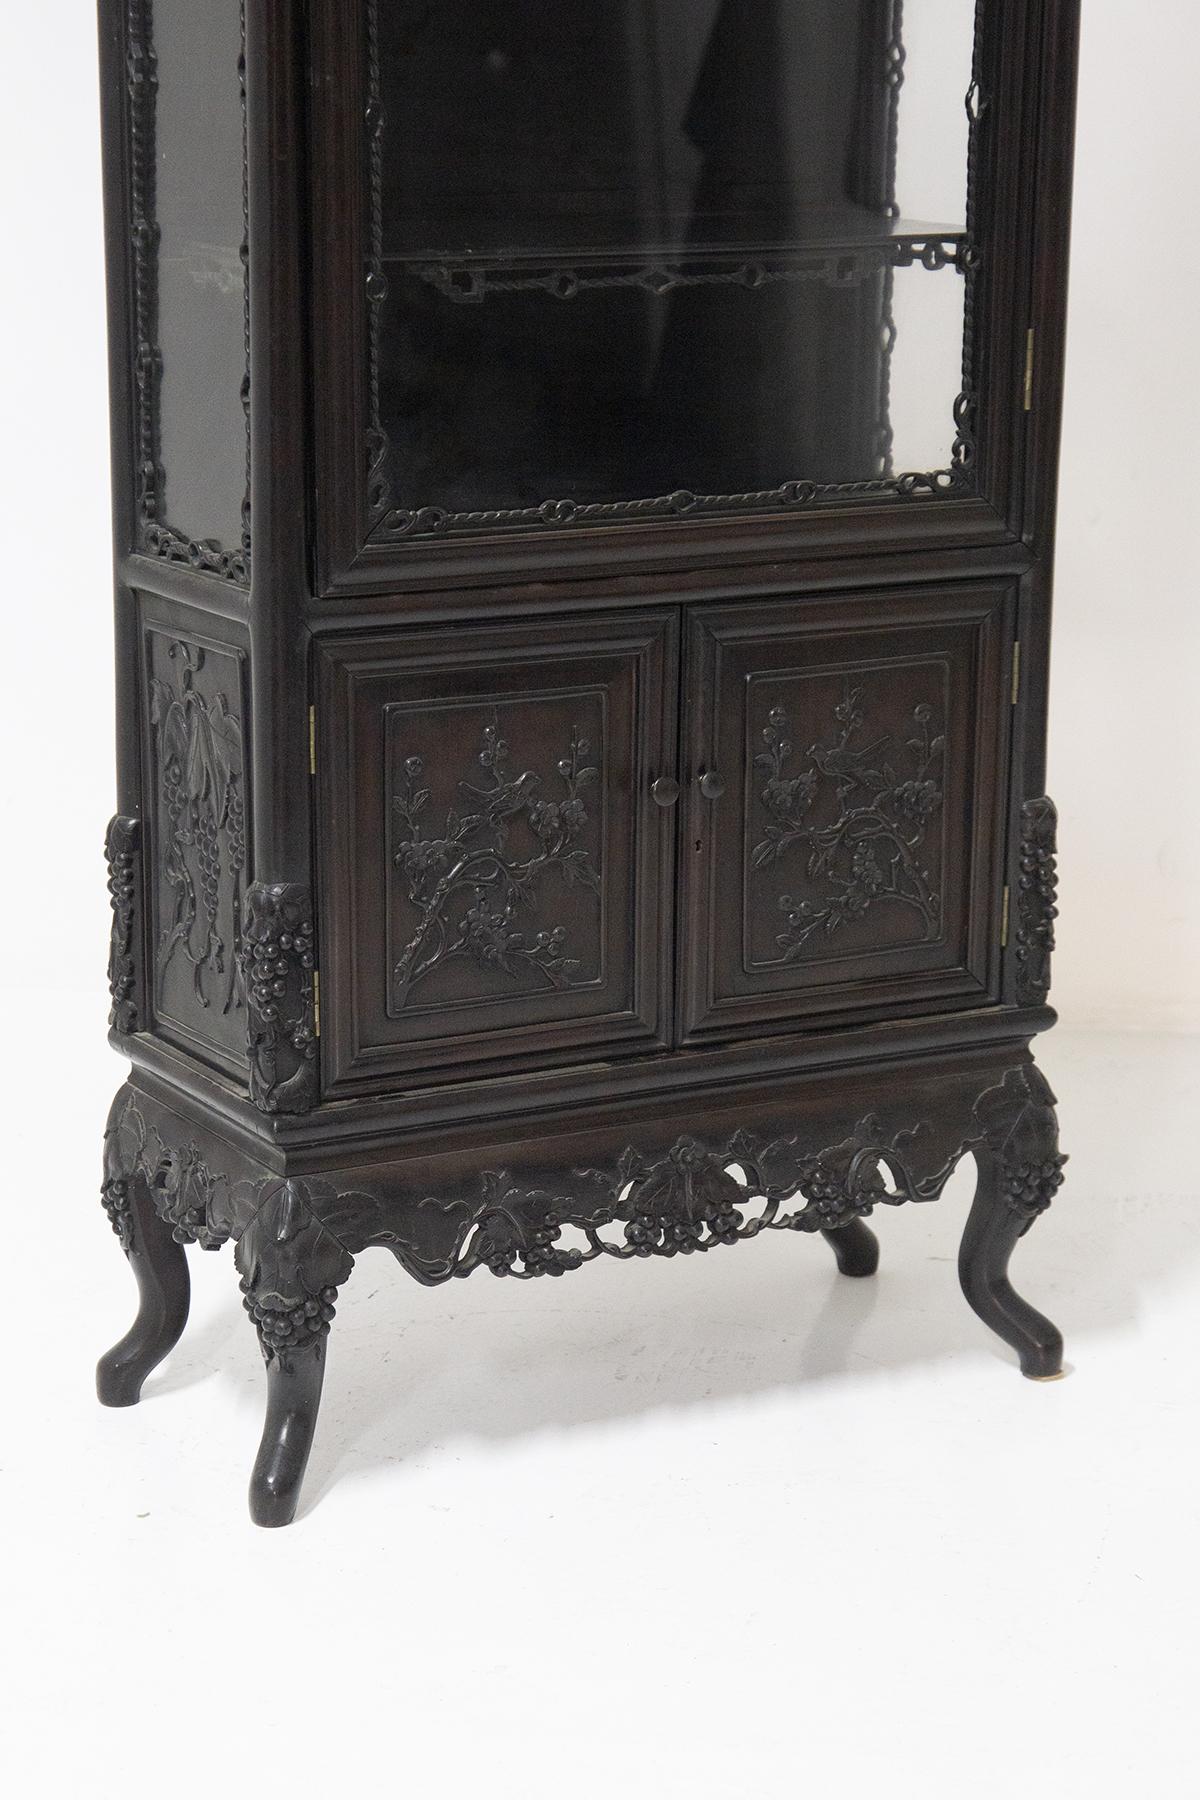 Gorgeous antique showcase of fine French manufacture, created for English colonists, belonging to the 1800s.
This stunning display case is made entirely of a very fine dark wood, fabulously crafted and embellished.
There are 4 feet to support the